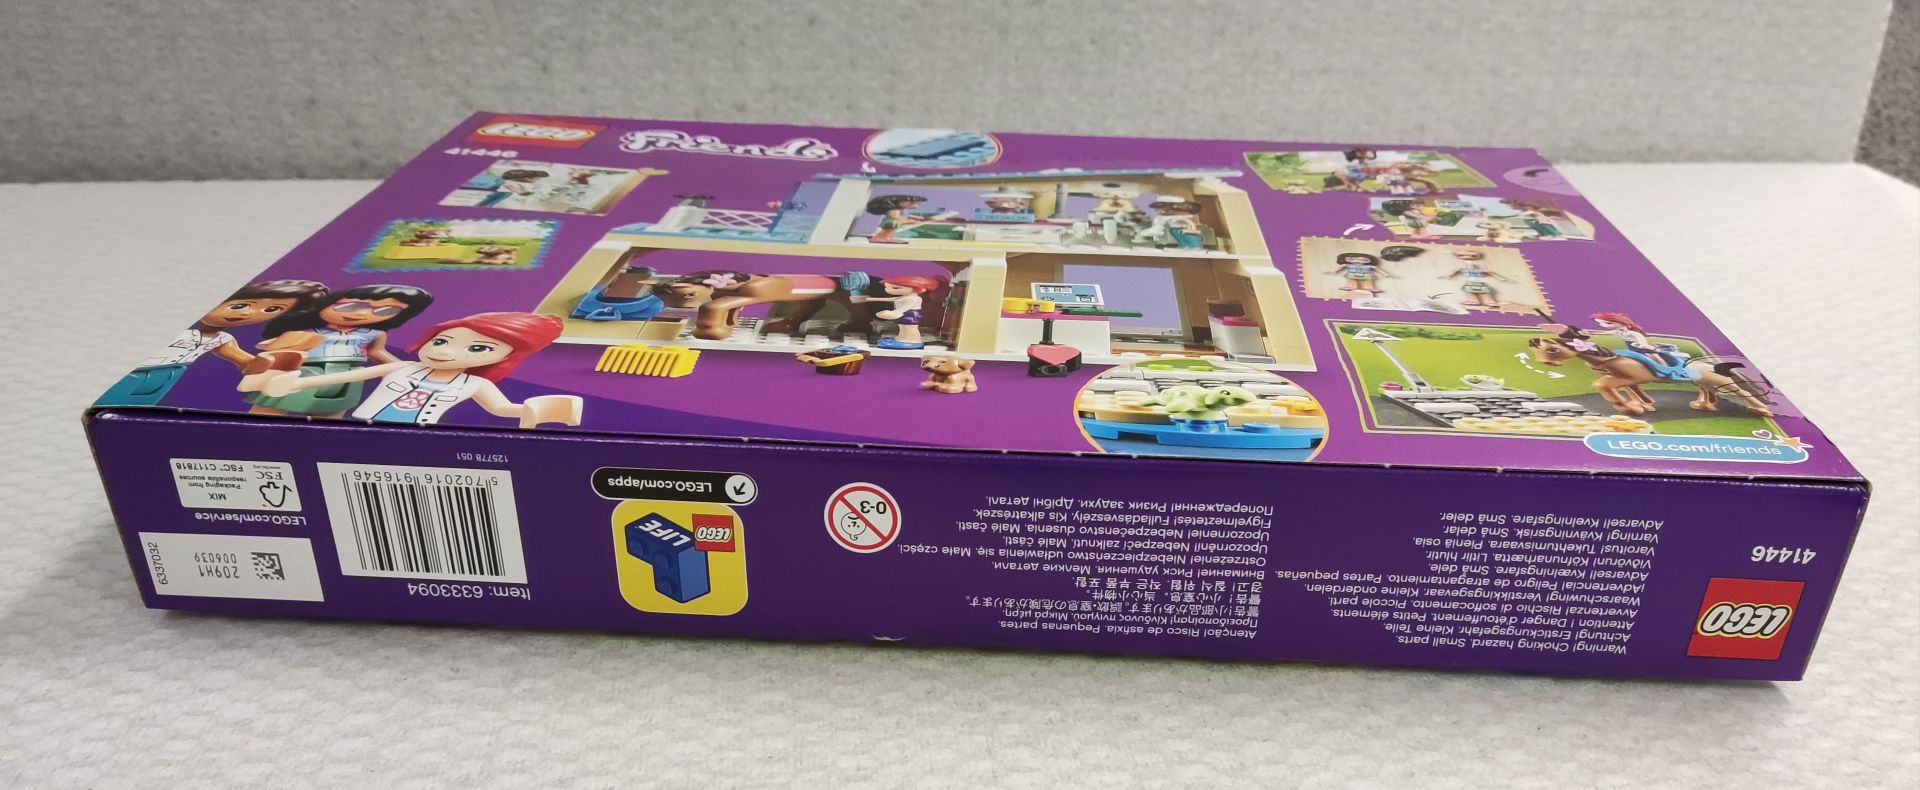 1 x Lego Friends Heartlake City Vet Clinic Animal Rescue Playset - Model 41446 - New/Boxed - Image 6 of 7